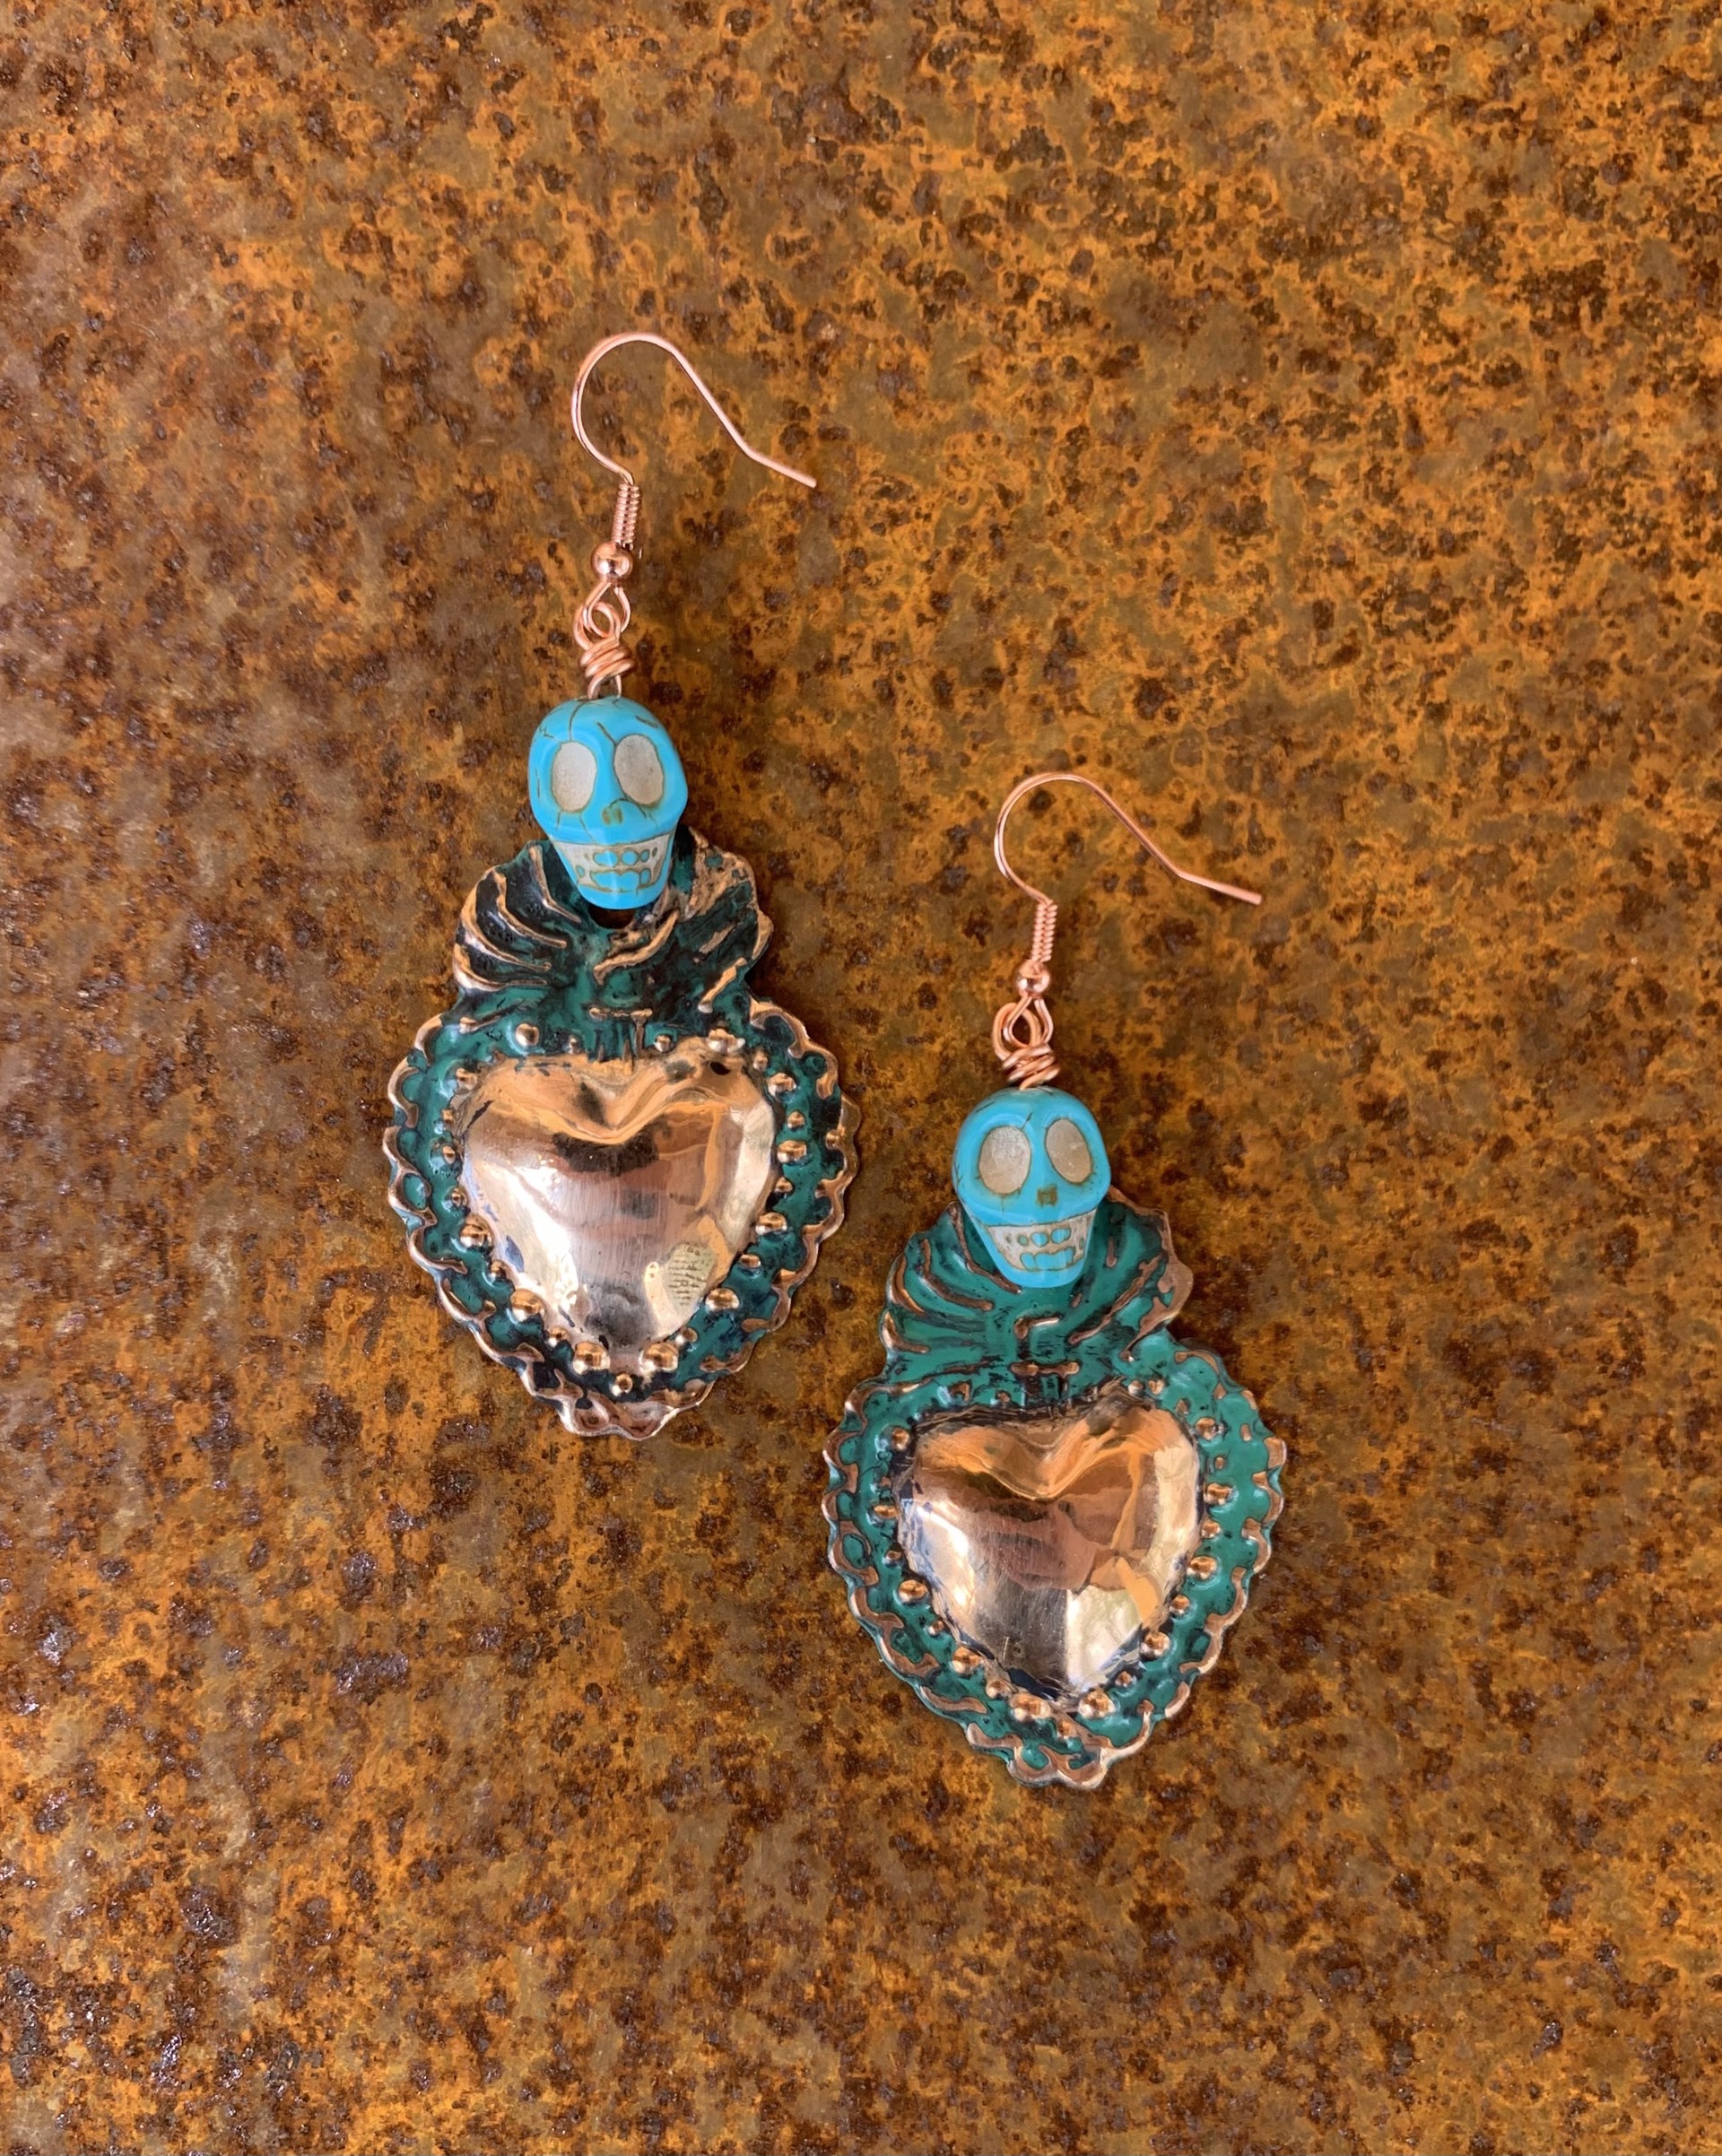 K532 Small Copper Sacred Heart Earrings with Sugar Skulls by Kelly Ormsby